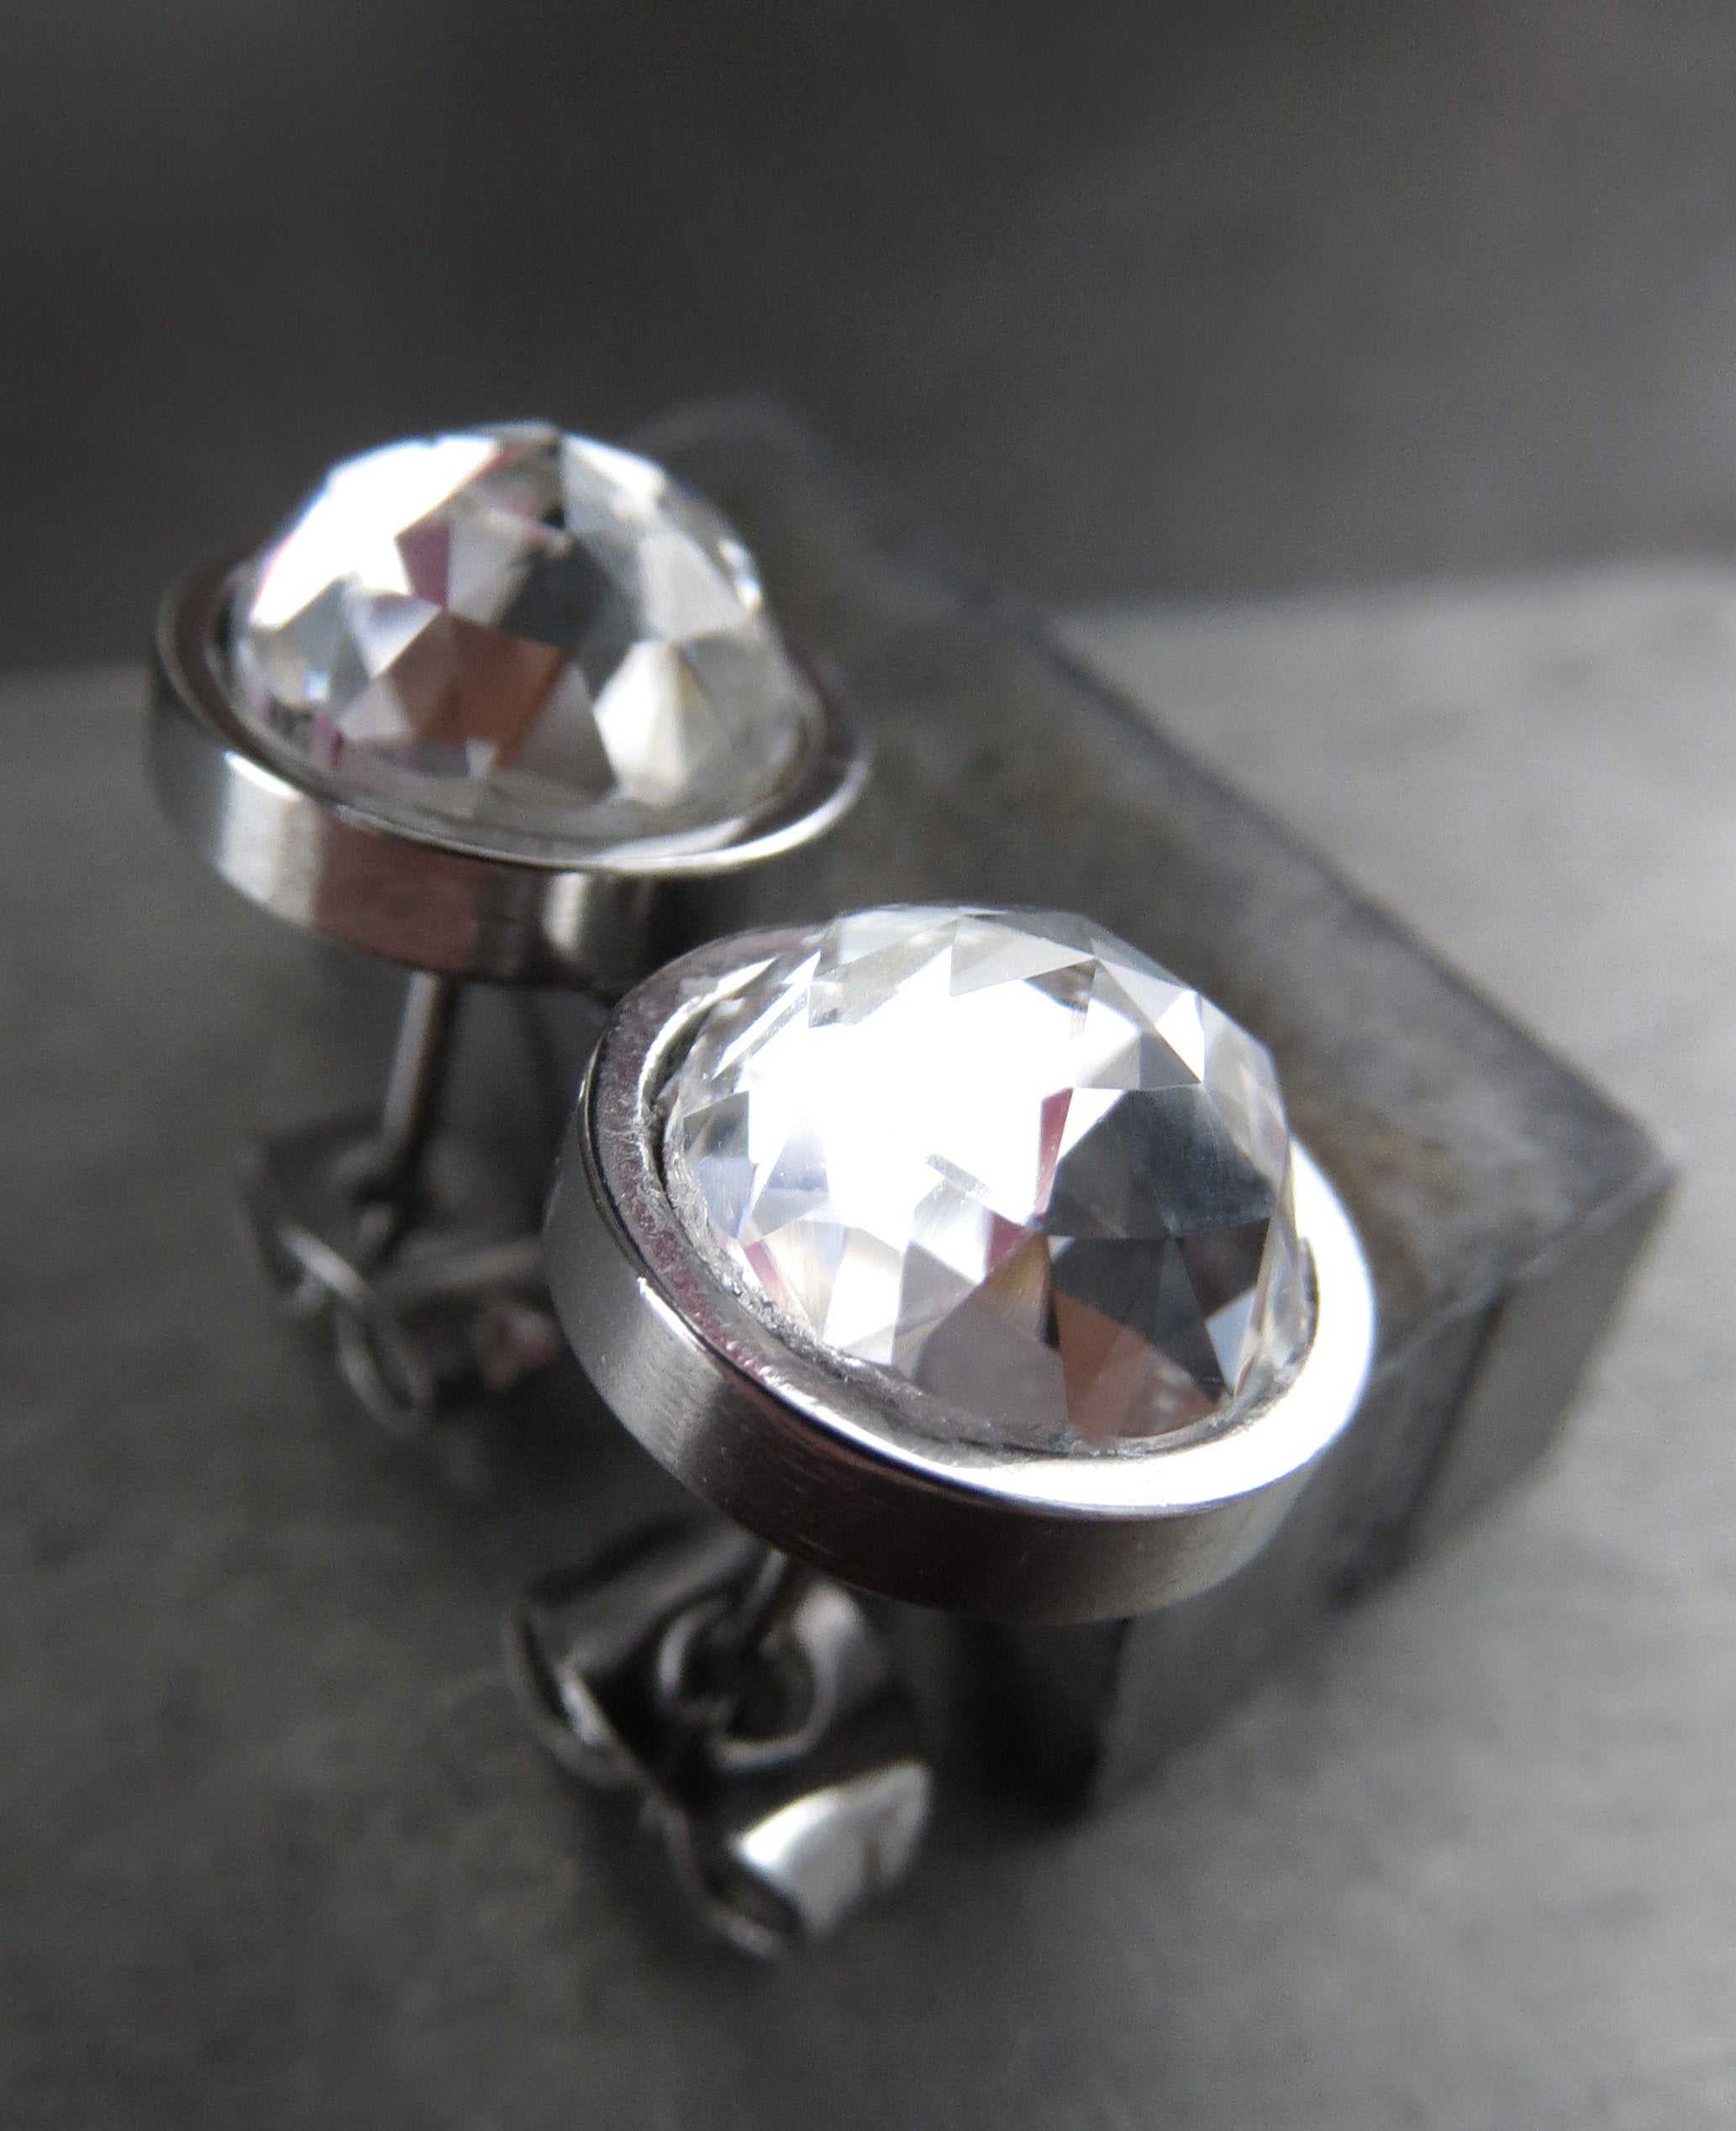 Modern Silver Stud Earrings with Clear Faceted Swarovski Crystal, Large Round Stainless Steel Post Earrings, Unisex Women Mens Post Earrings